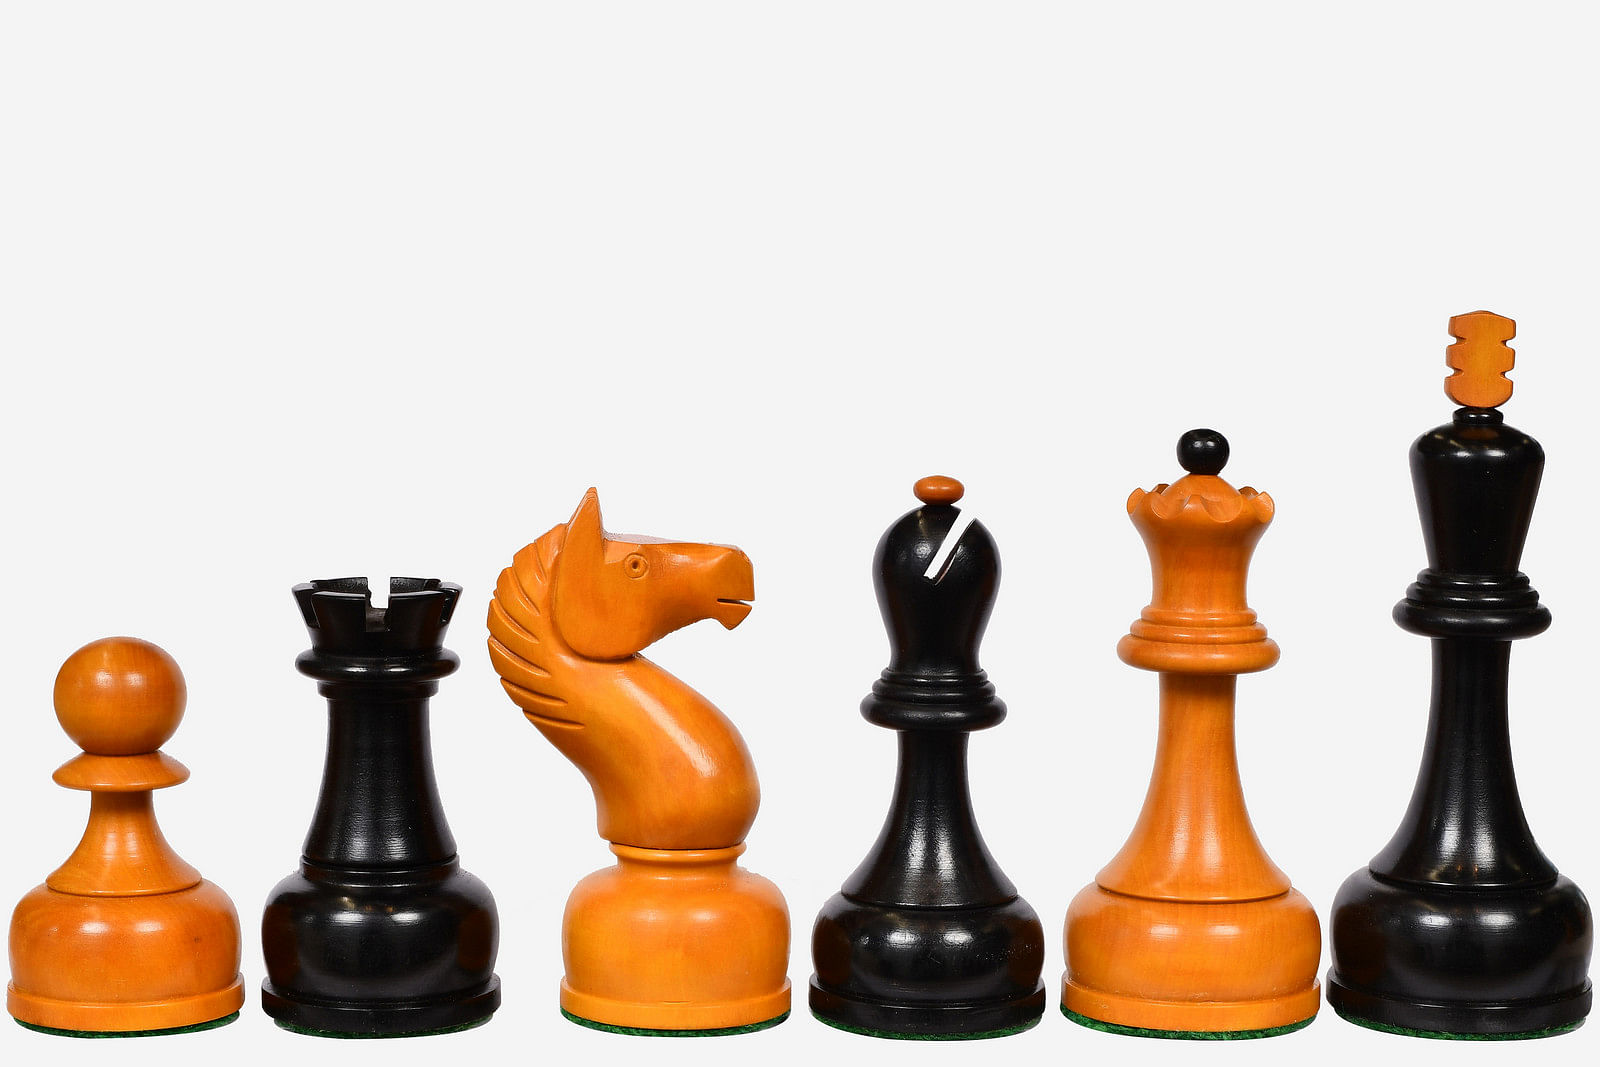 The 1961 Soviet Championship Weighted Wooden Chess Pieces in Ebonized Wood & Antique Box Wood - 4 King